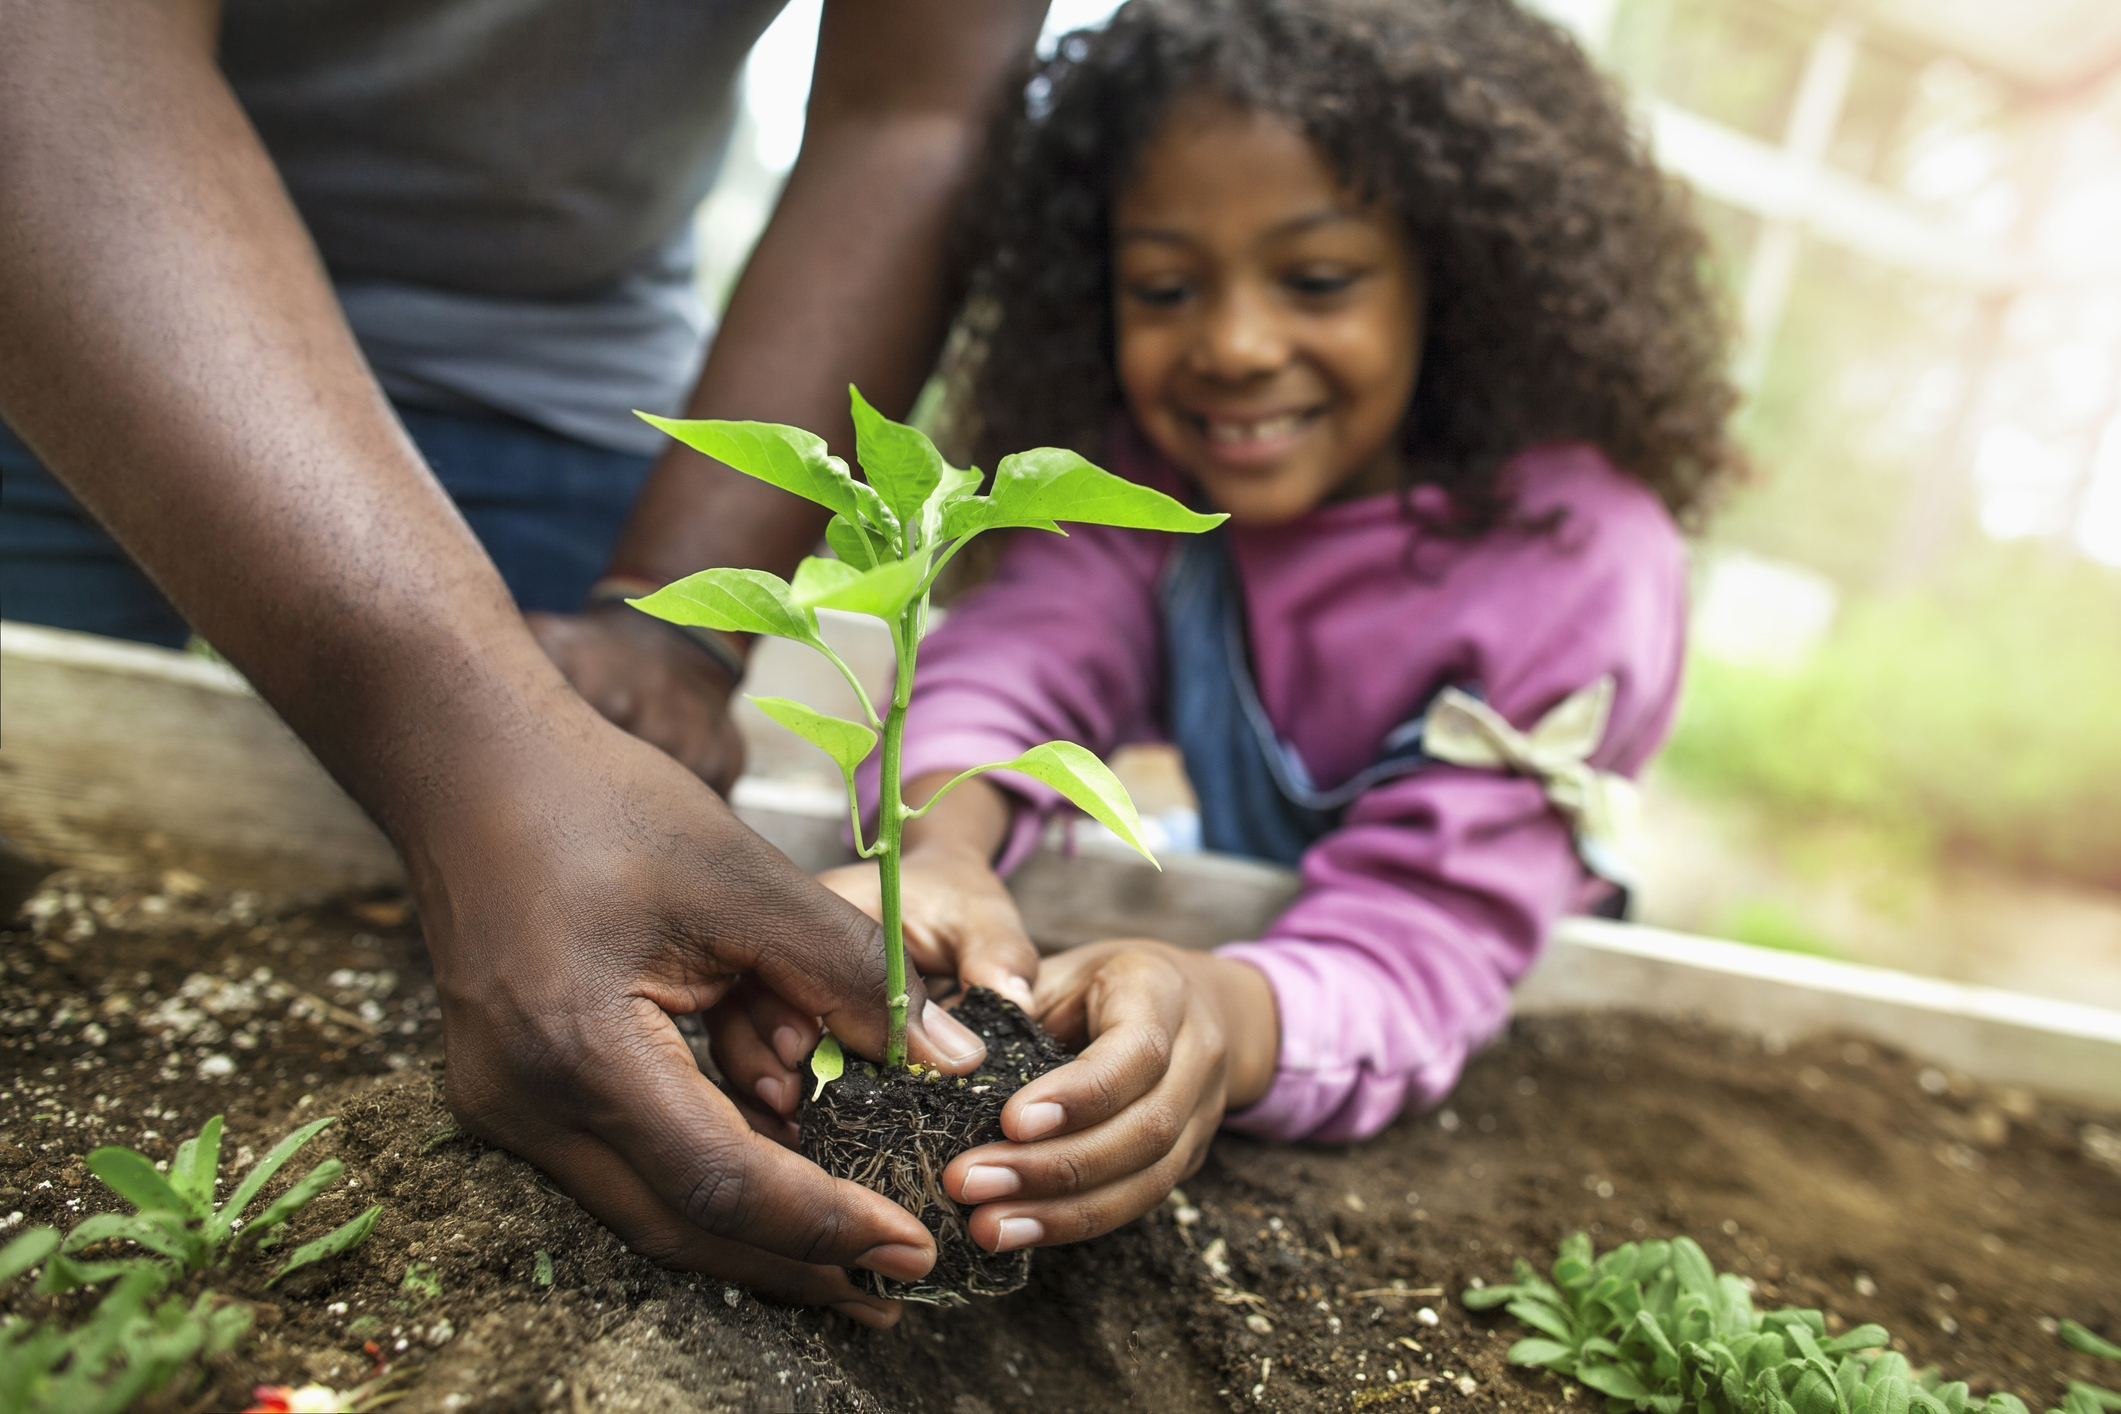 A young girl planting a tree in soil.